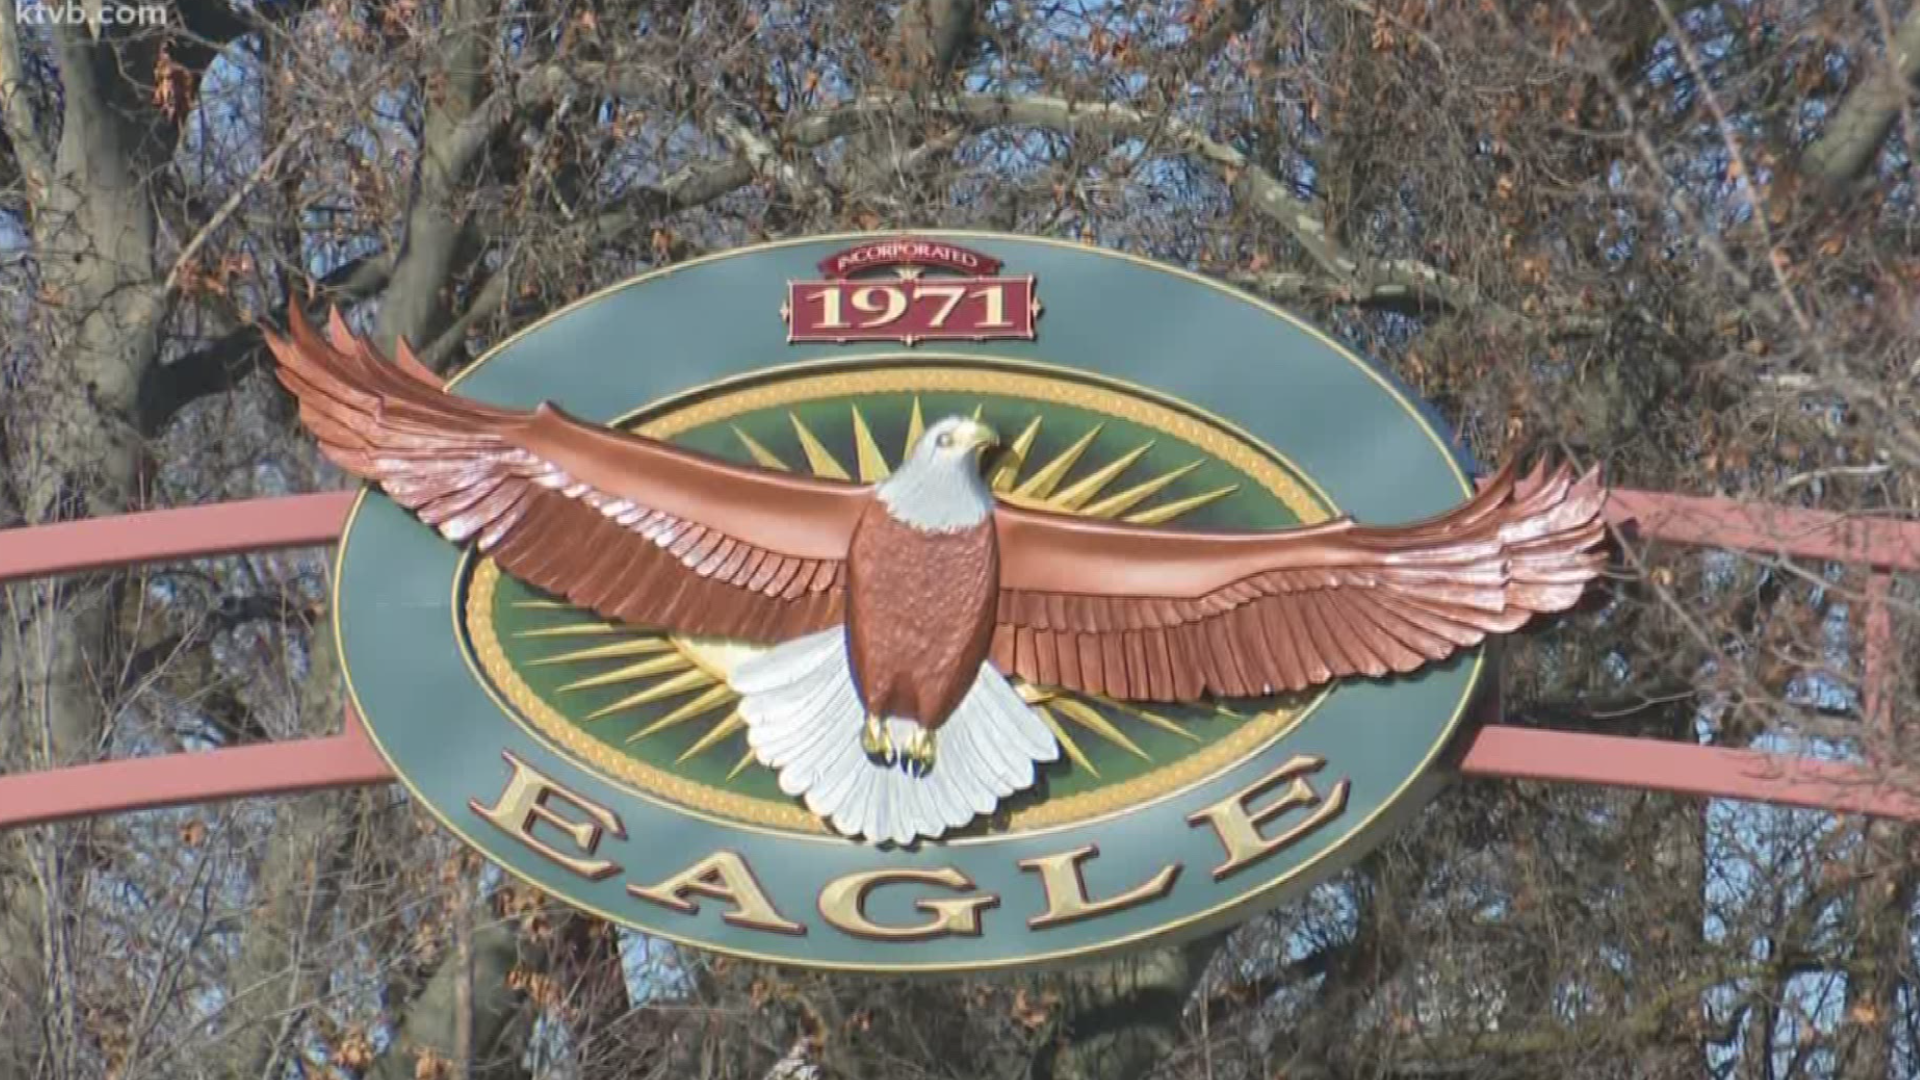 Suez Water is currently preparing to buy Eagle's water systems and rights, but residents are fighting back.